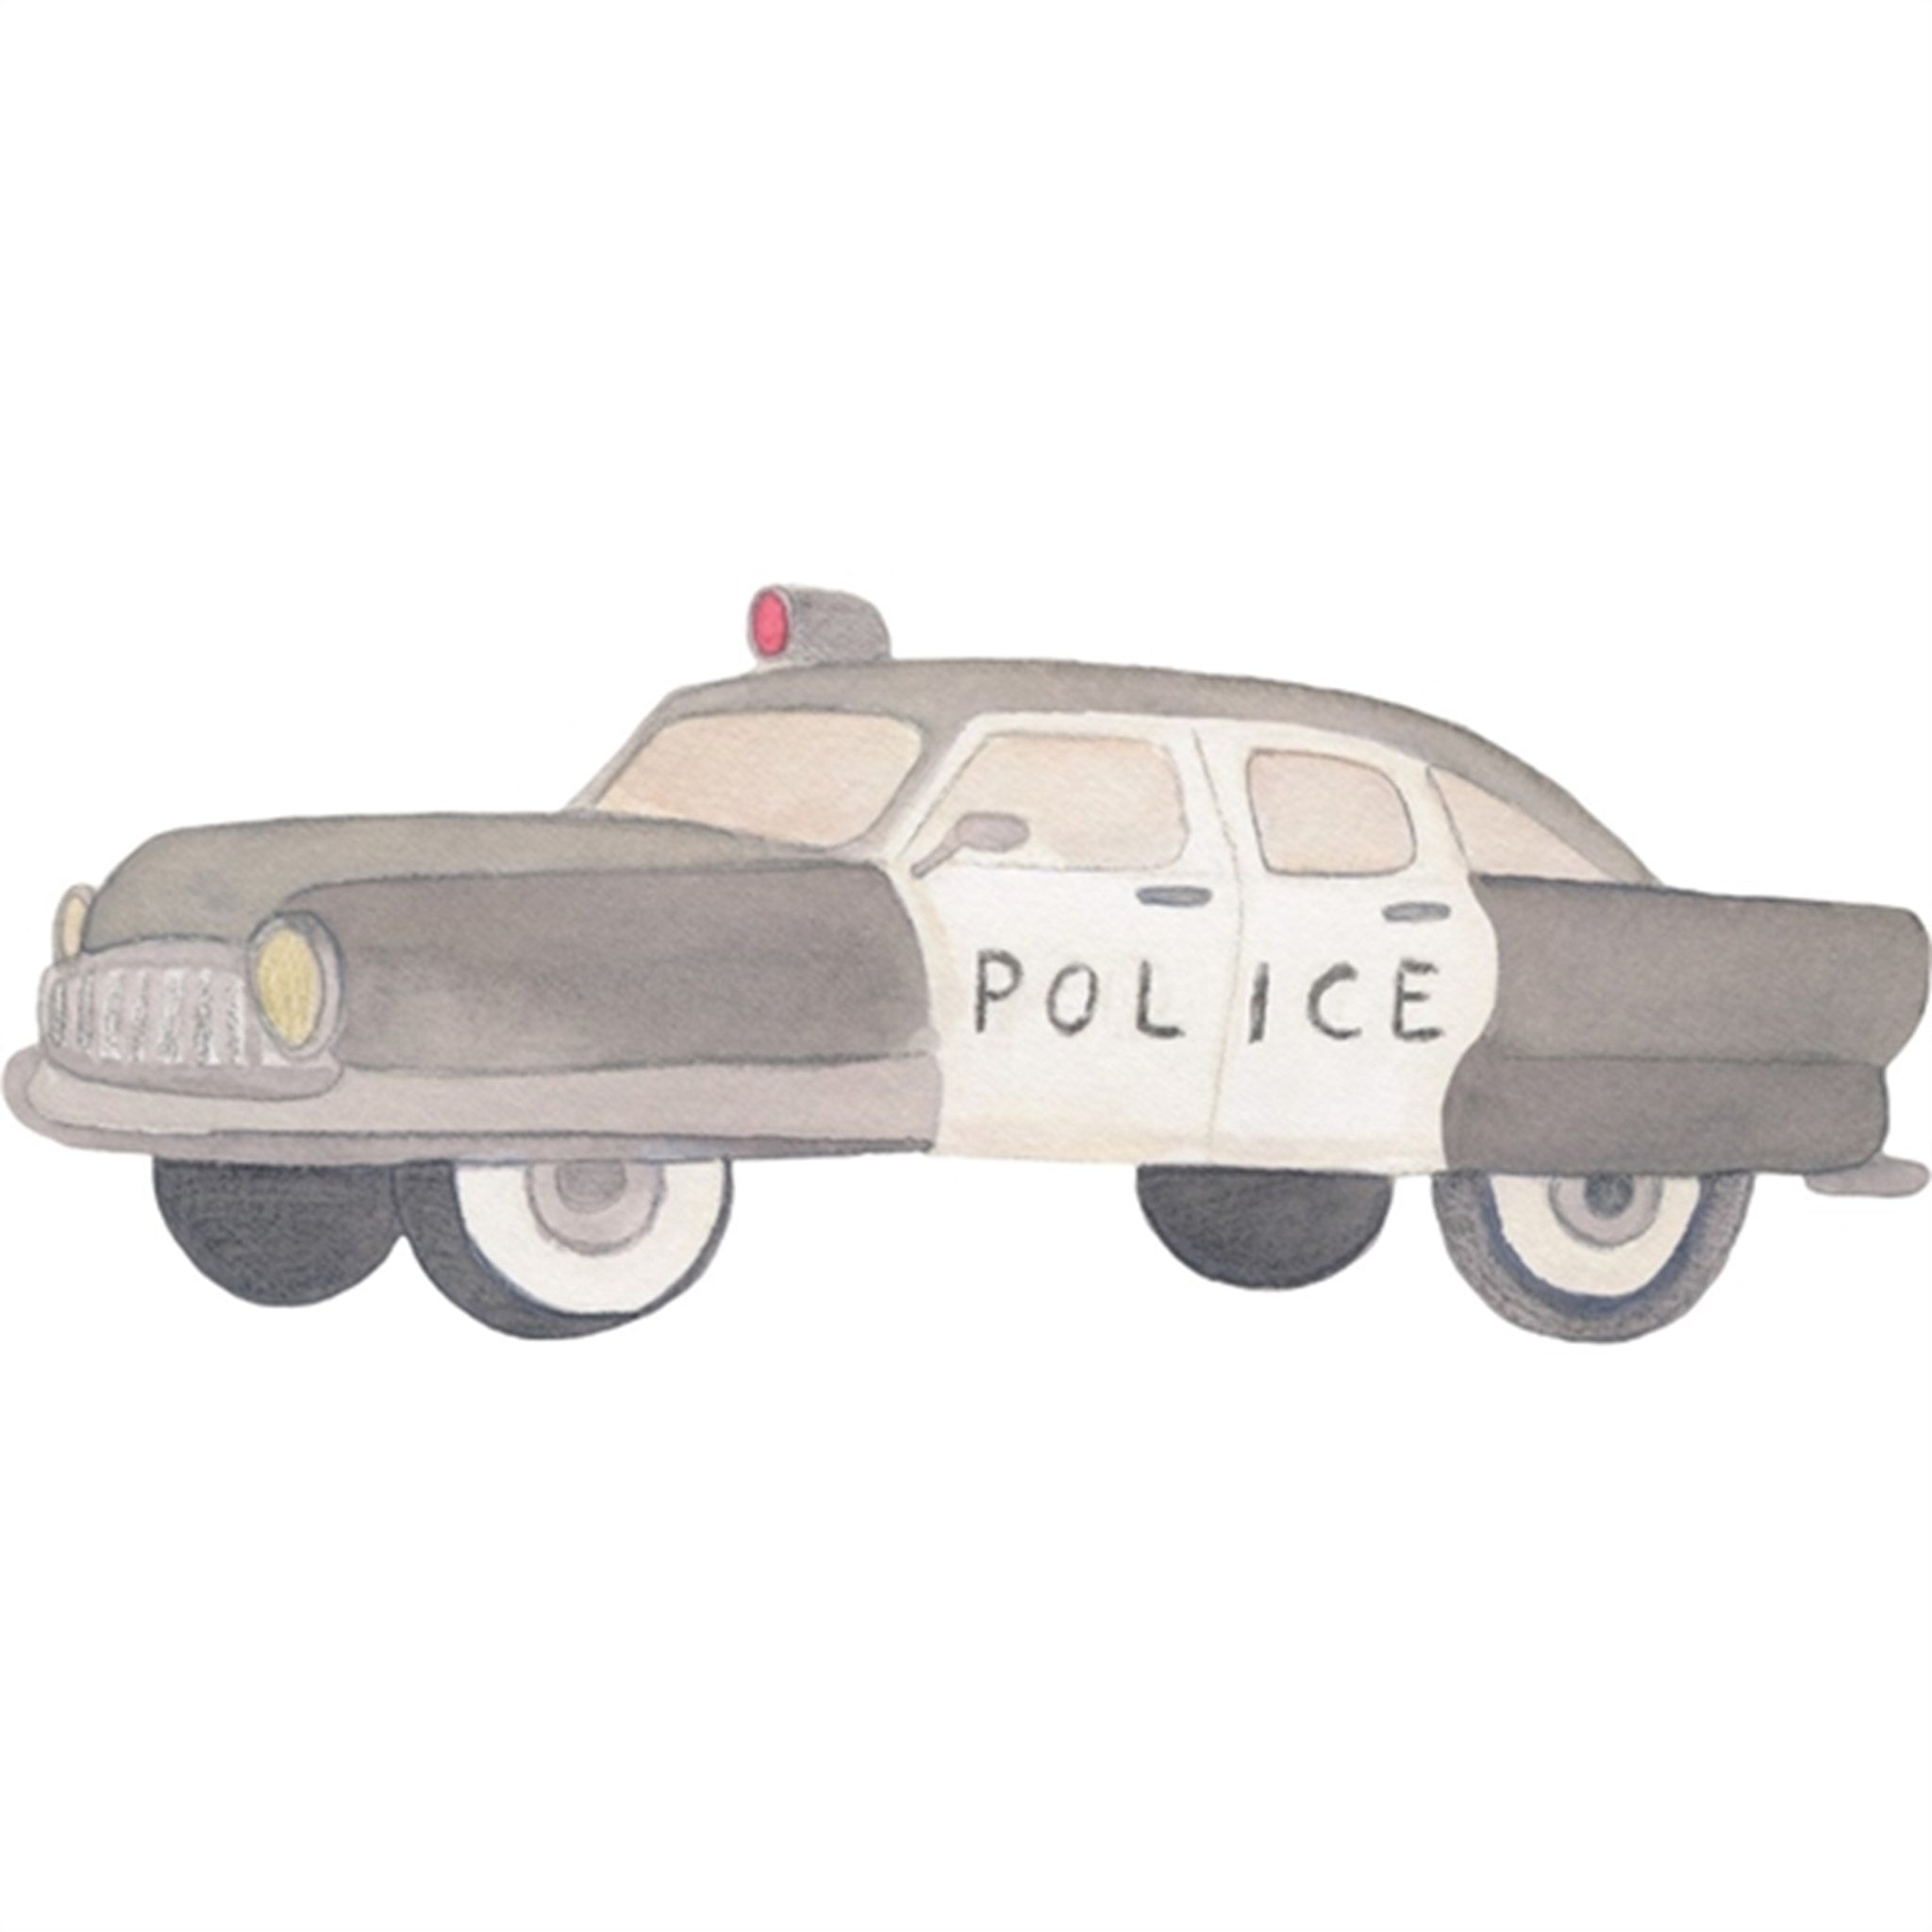 That's Mine Wallstickers Police Car Multi